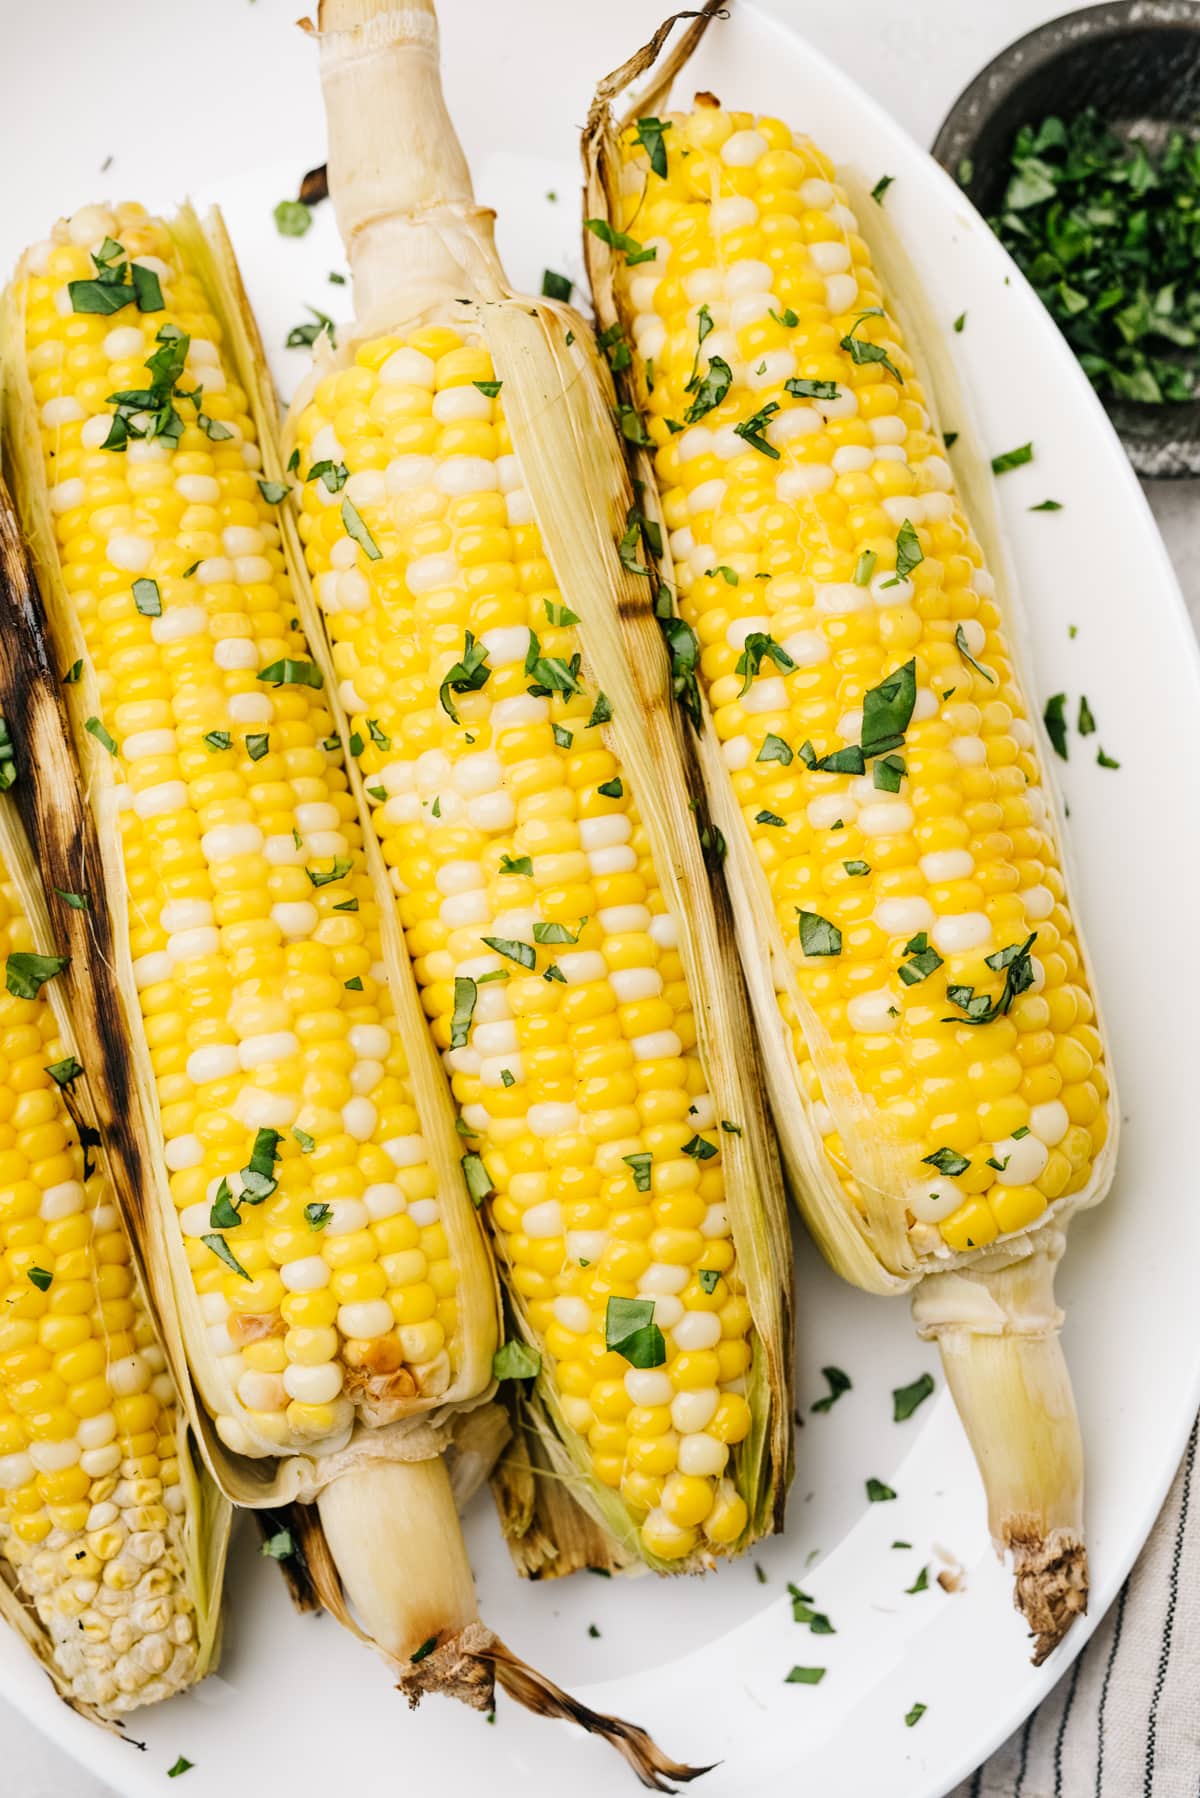 Four ears of grilled corn on the cob on a white plate, with a small bowl of fresh chopped herbs to the side.